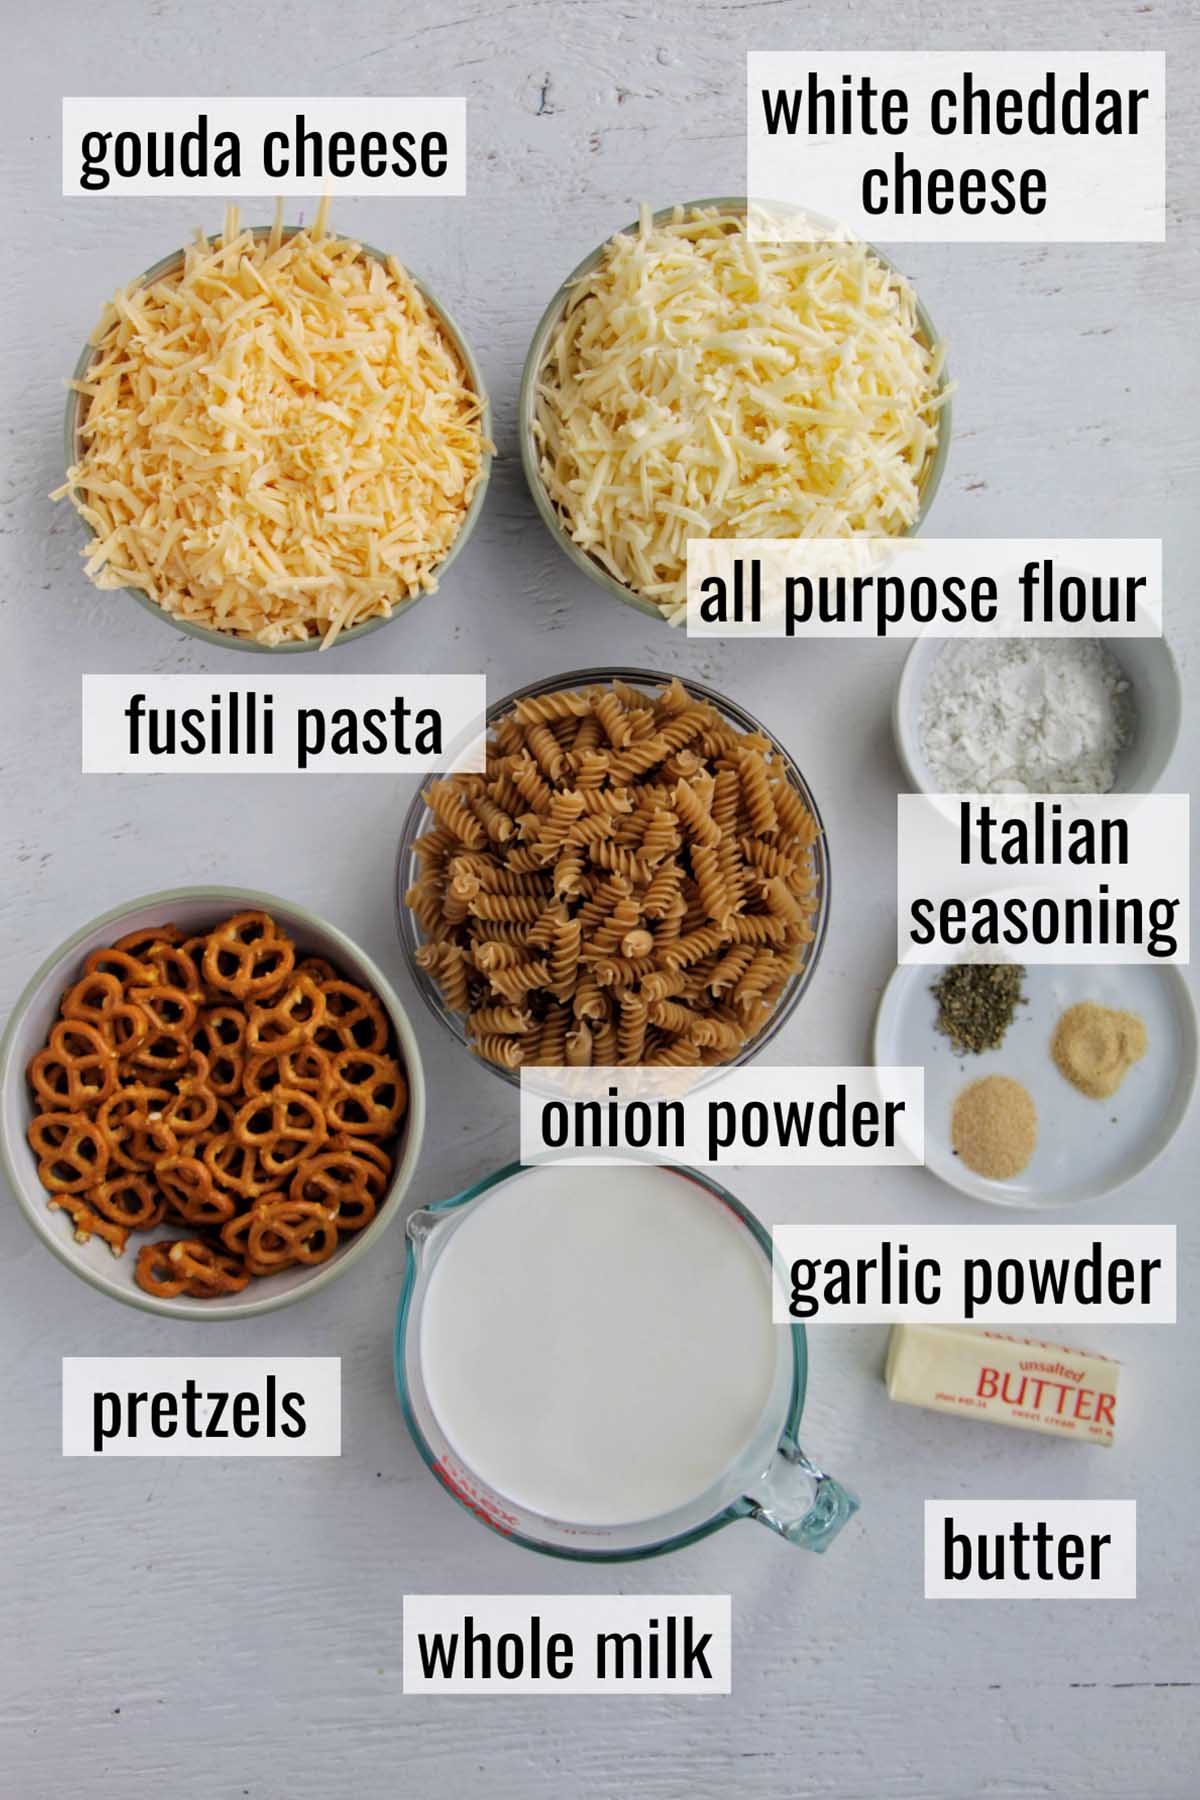 white cheddar macaroni and cheese ingredients with labels.